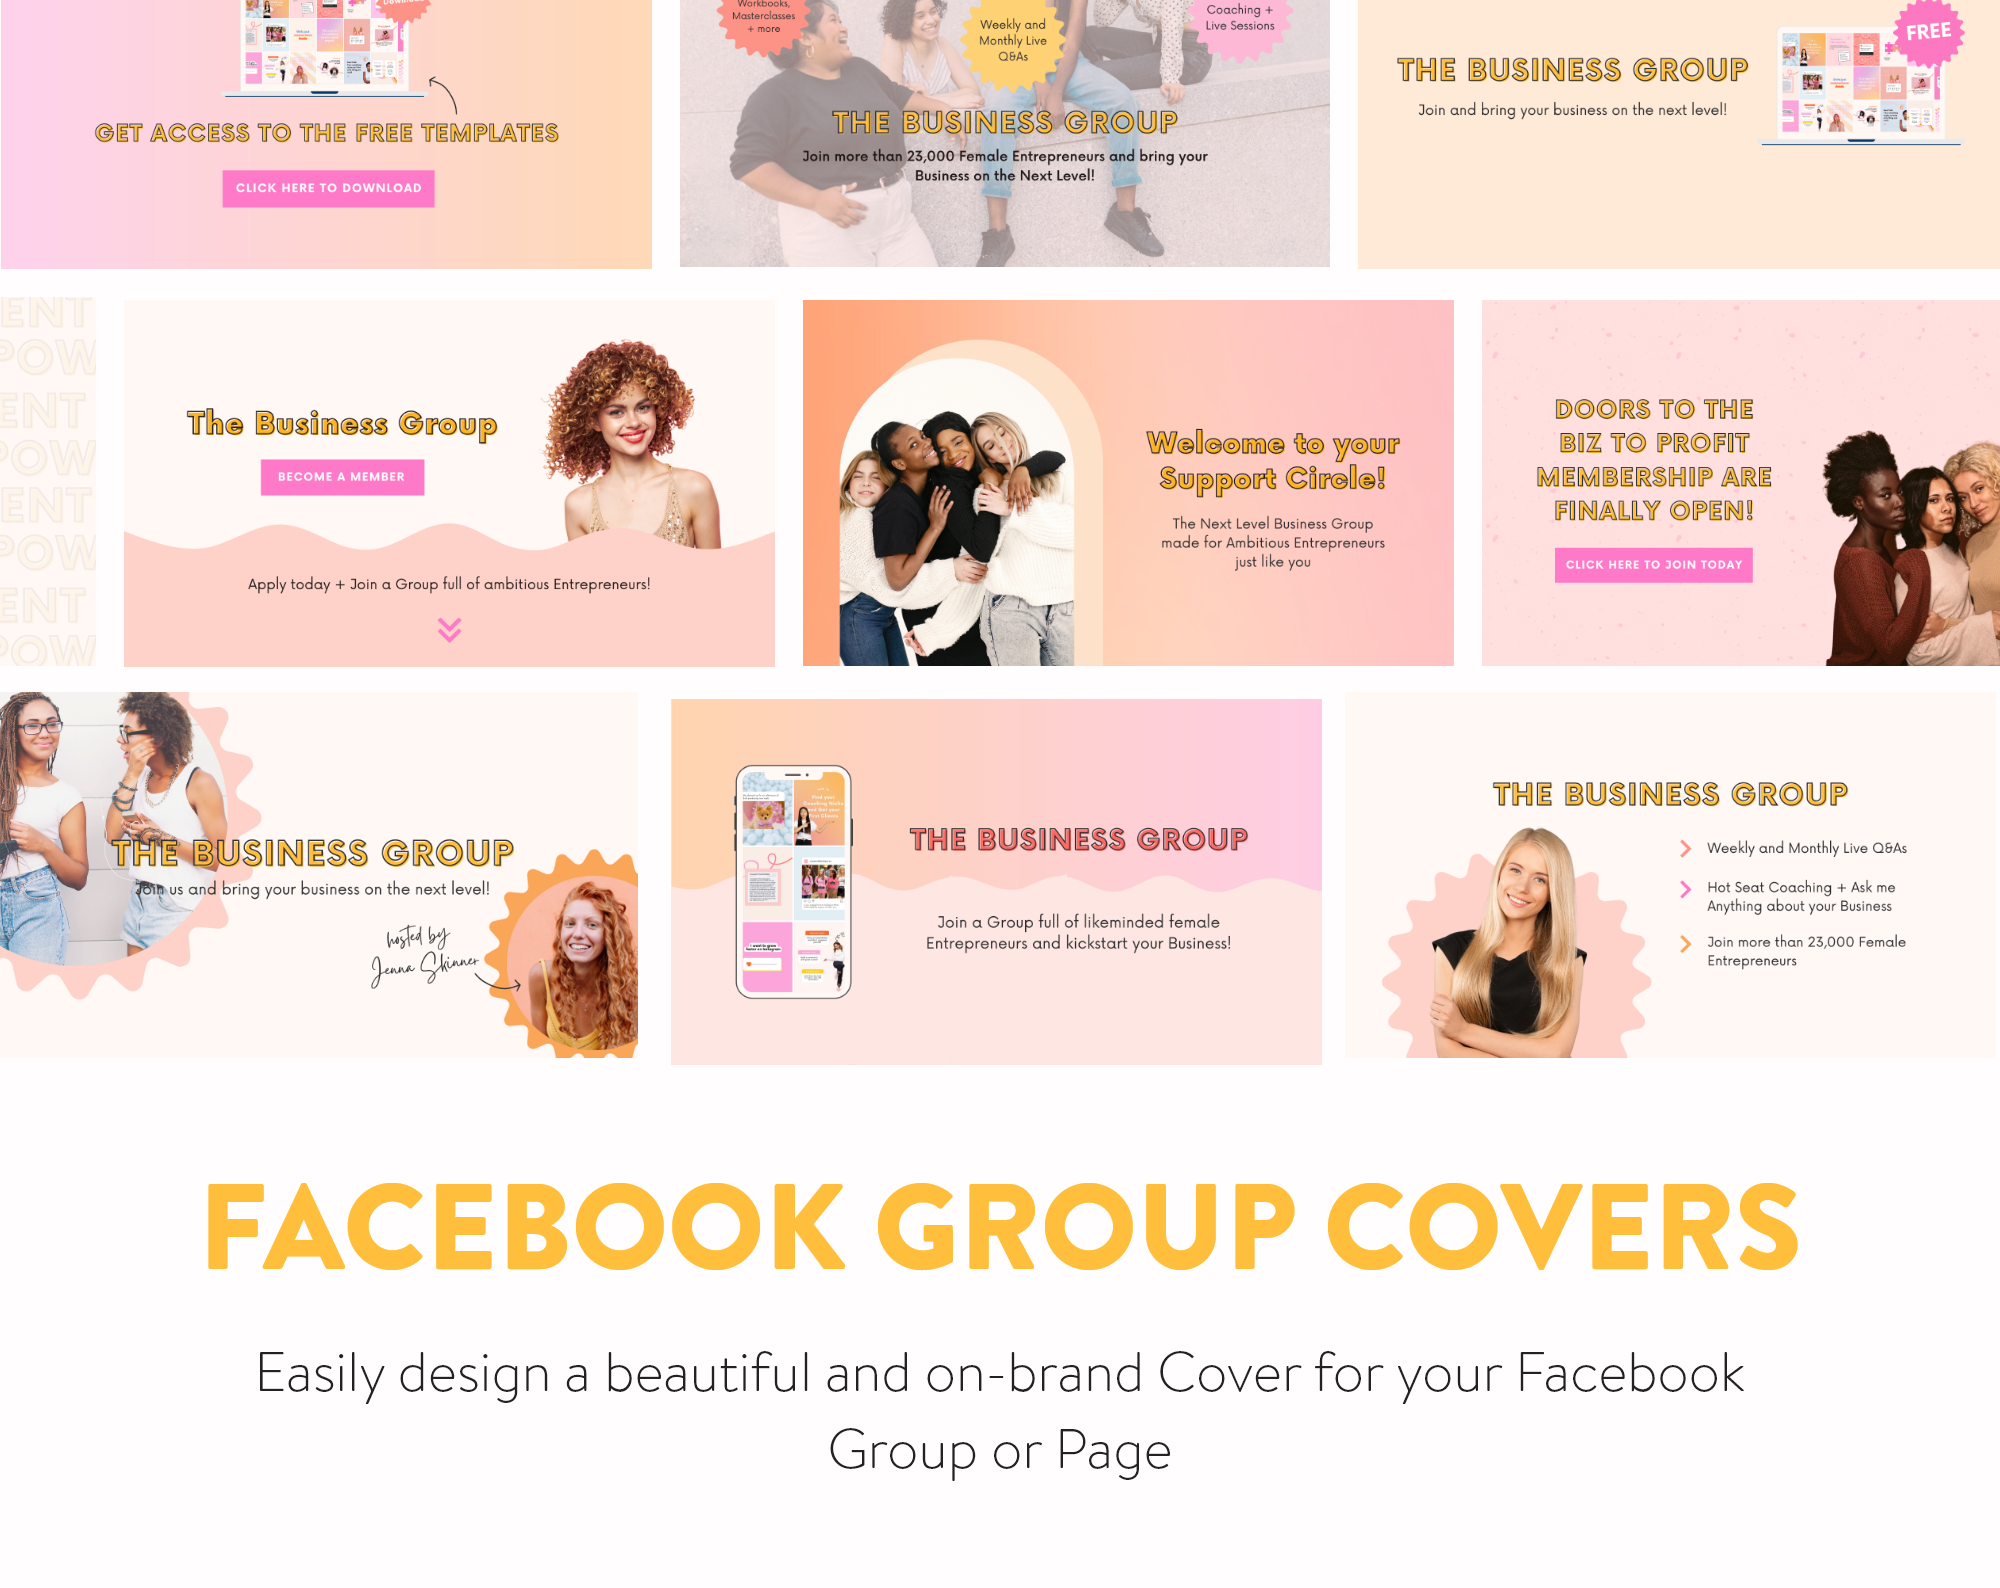 Facebook-marketing-templates-pack-for-canva-covers-3